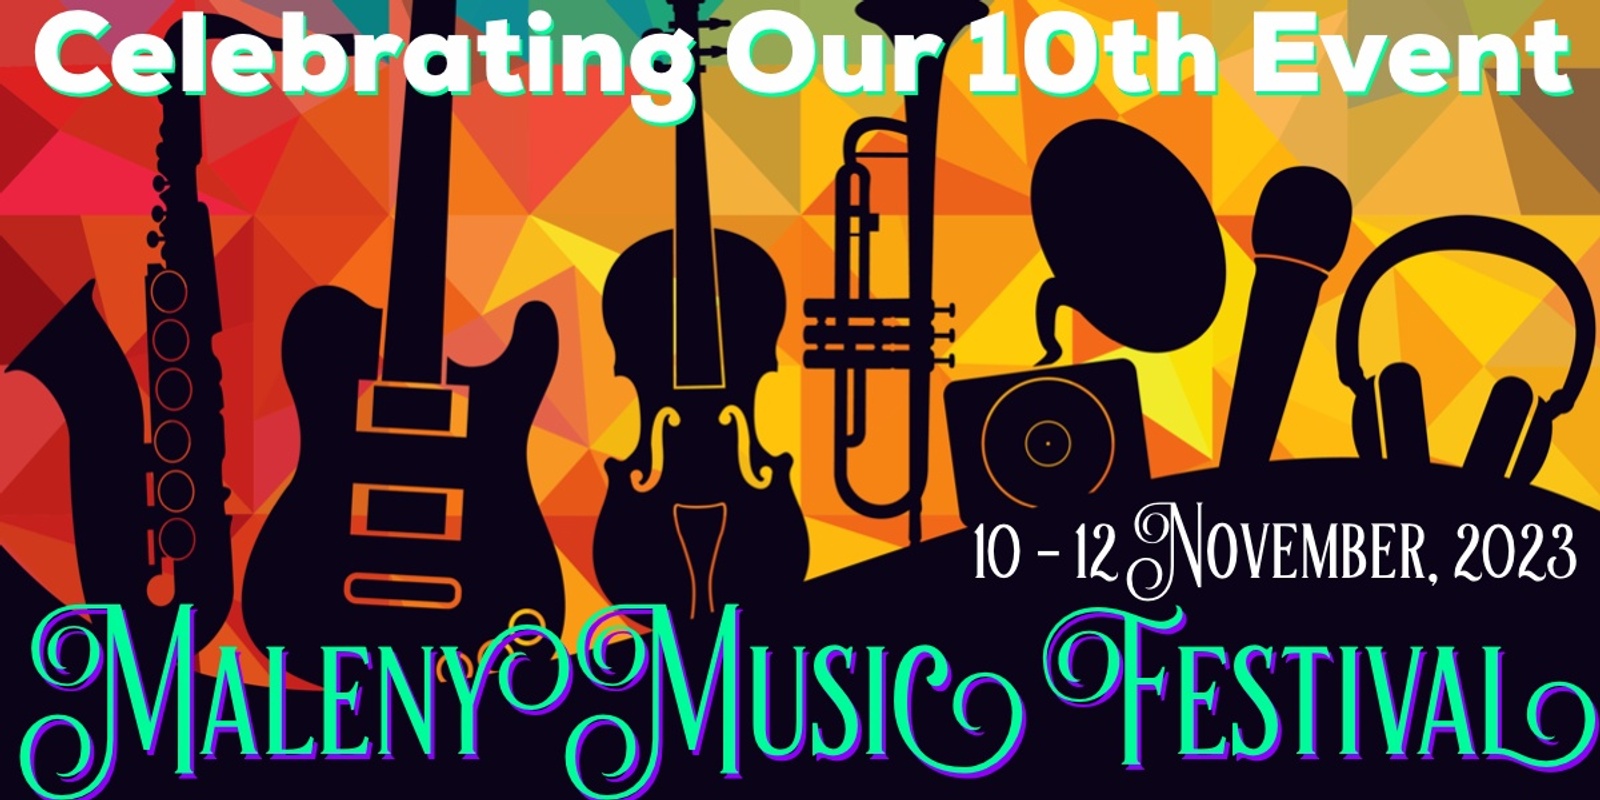 Banner image for Maleny Music Festival November 2023 - Celebrating Our 10th Event